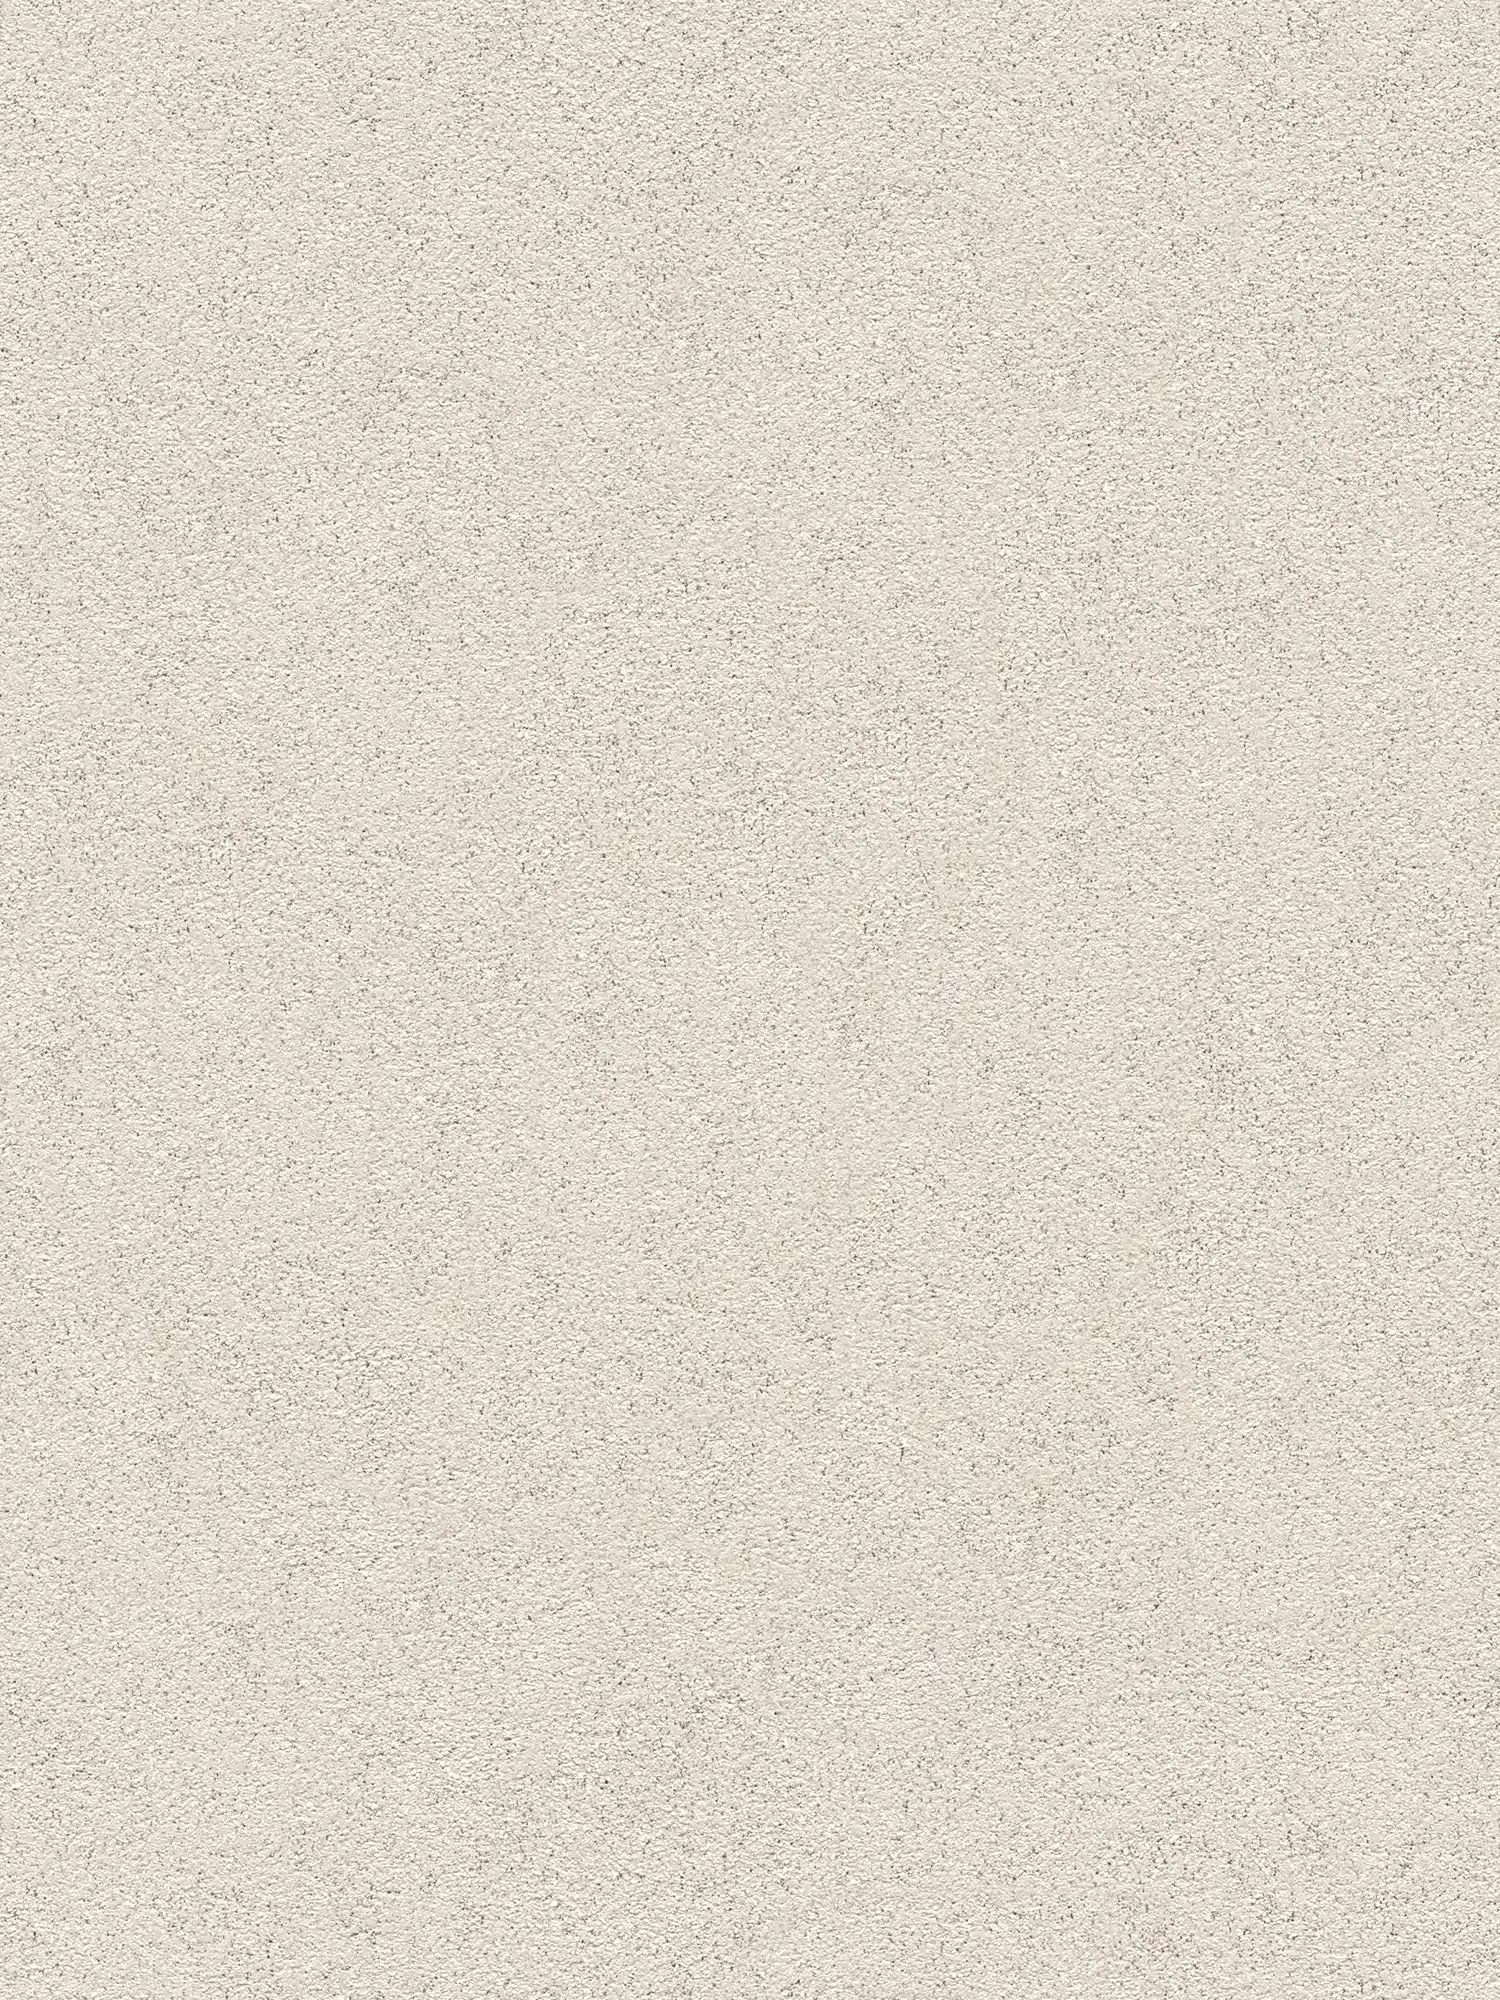 Fine plaster look wallpaper with structure embossing & colour pattern - grey
